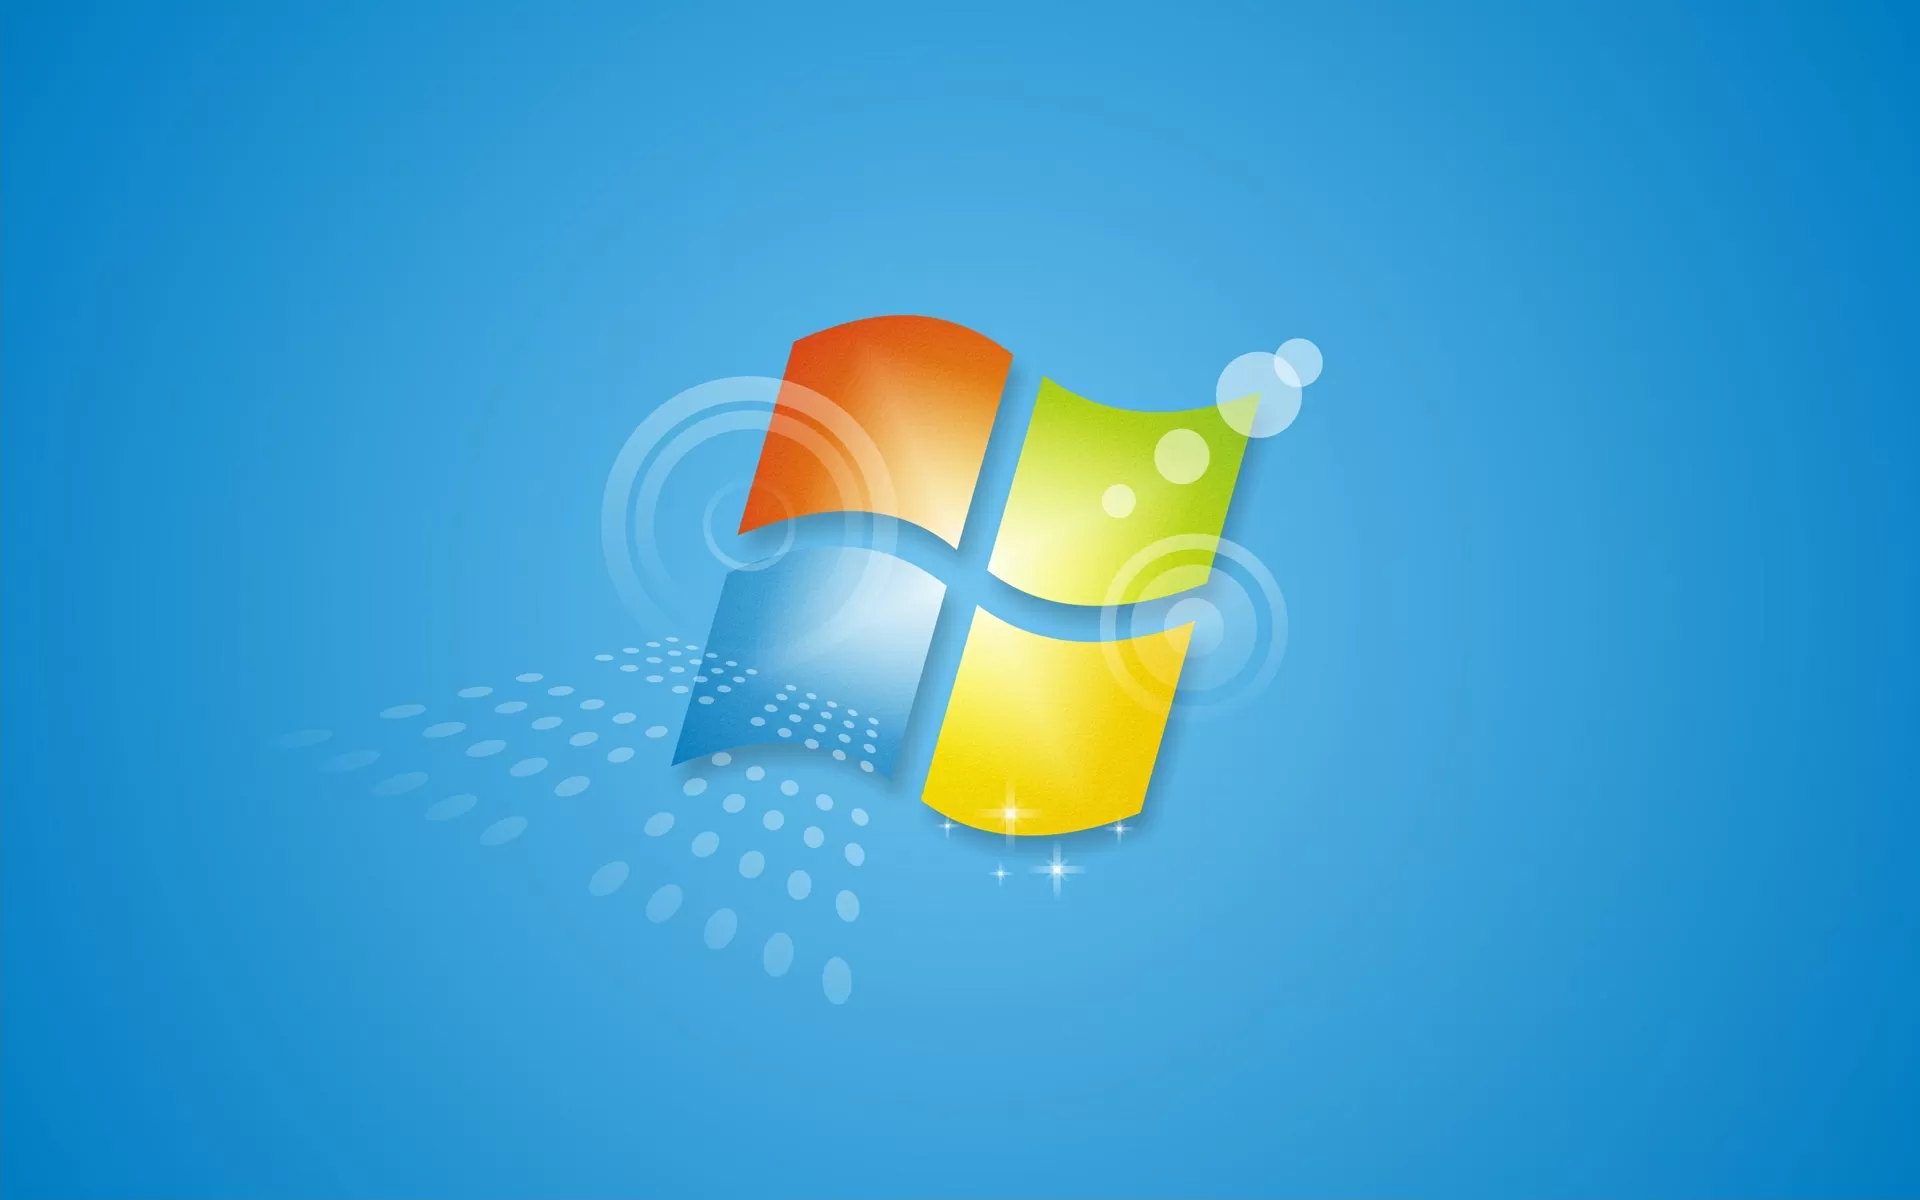 Many businesses are taking too long to migrate from Windows 7